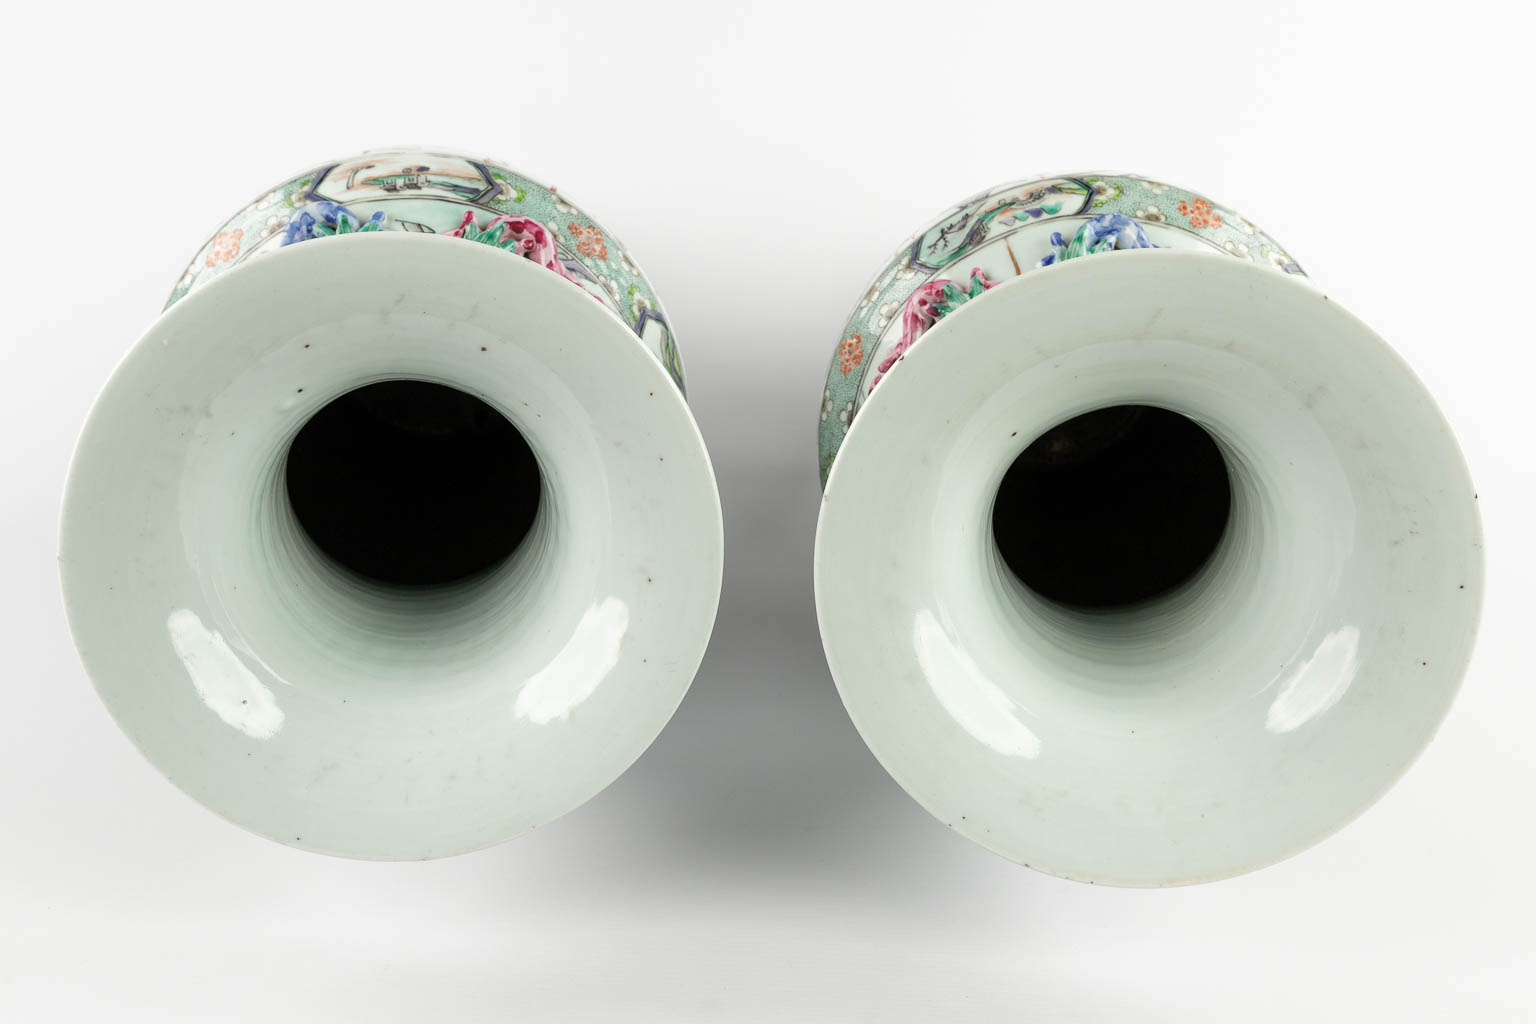 A pair of Chinese Famille Rose vases decorated with warriors in ships. 19th/20th C. (H:62 x D:26 cm)